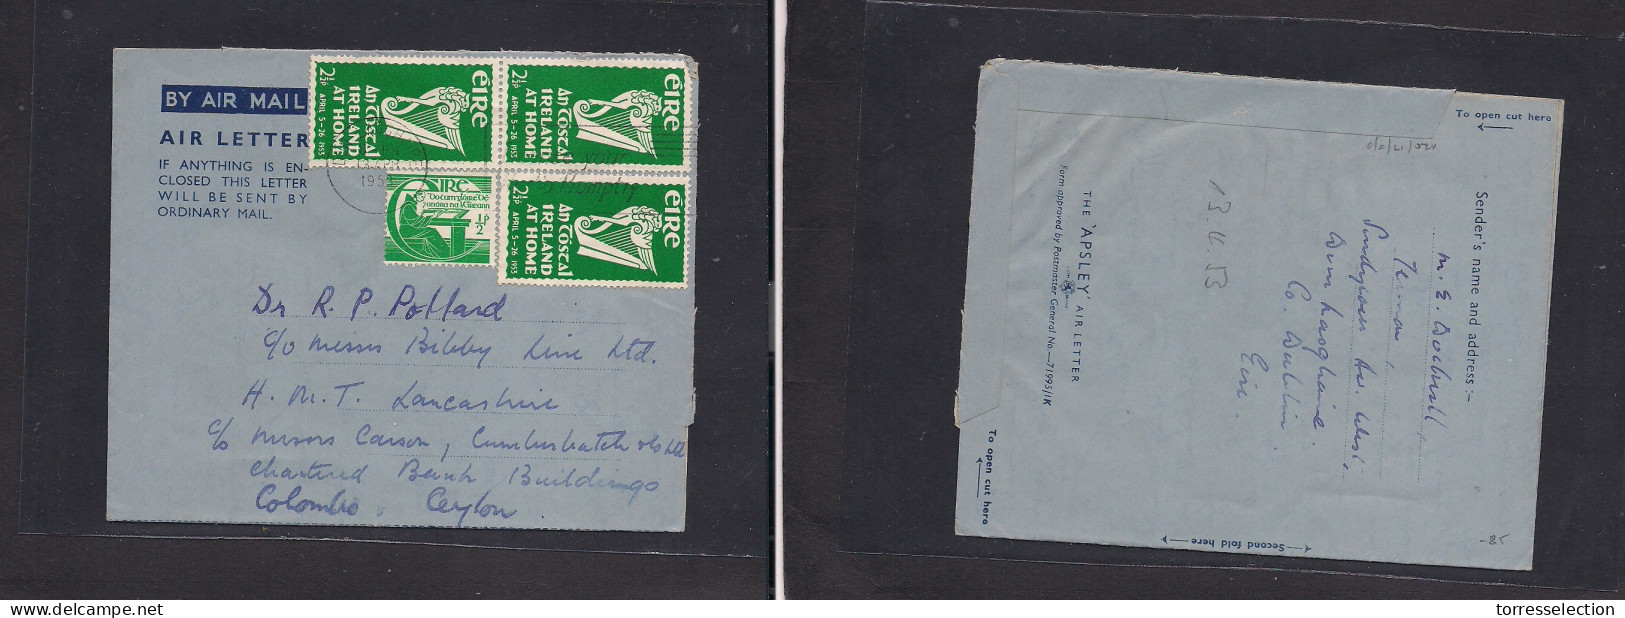 EIRE. 1953 (13 Apr) Haghainl - Ceylon, Colombo. Multifkd Airlettersheet, At 8p Rate, Rolling Cachet. Better Dest Usage.  - Usados